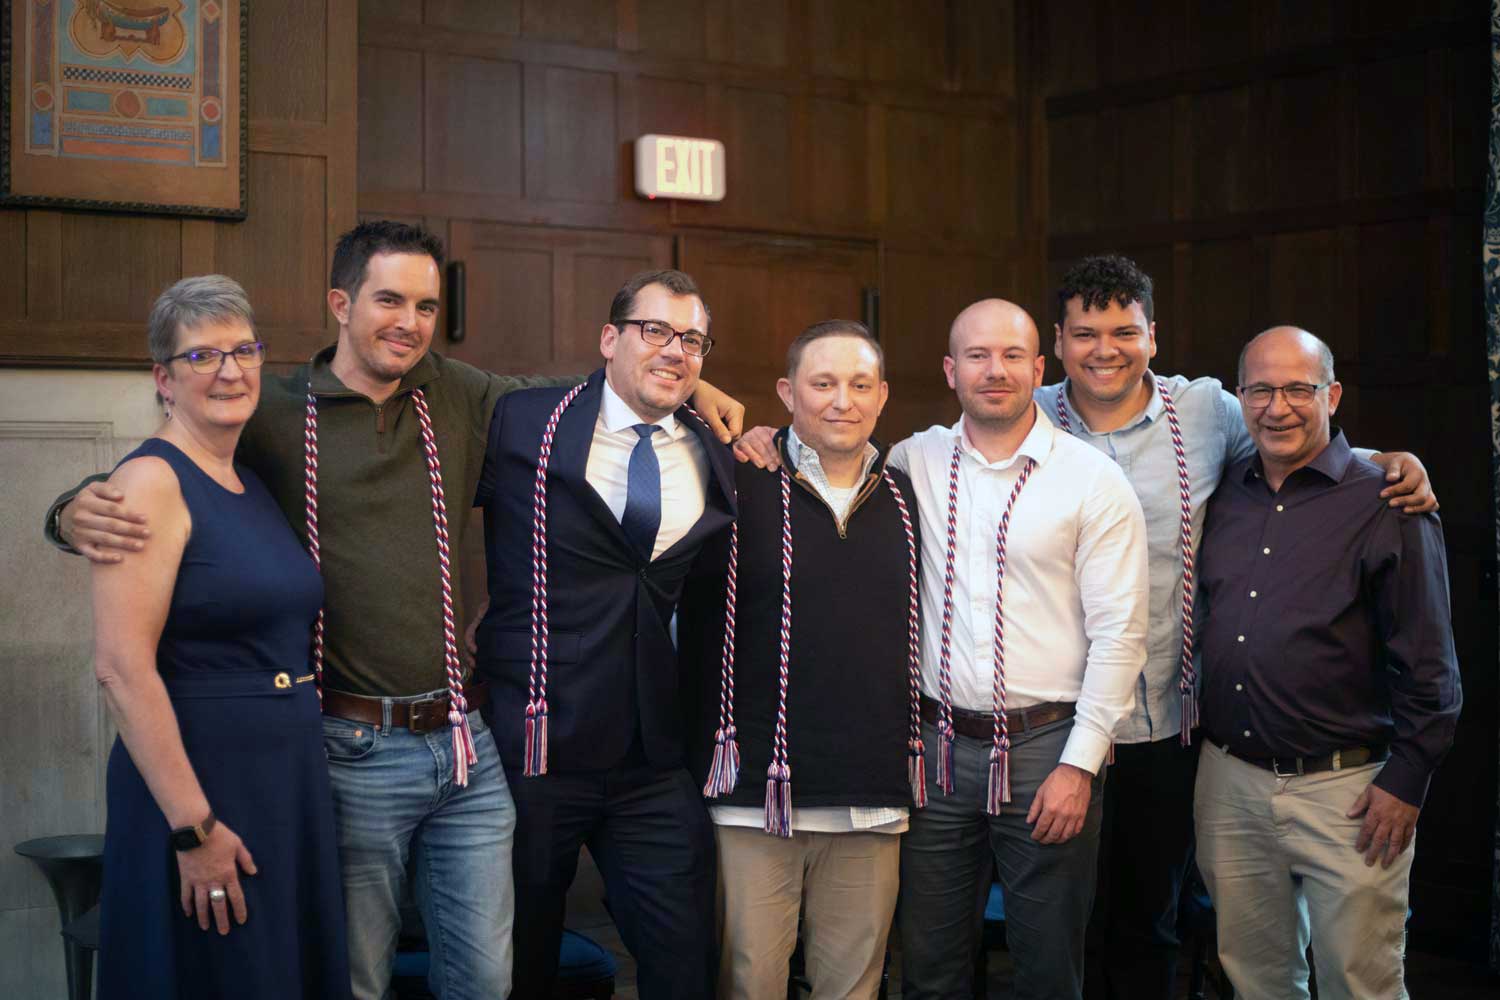 group of people wearing red/white/blue cords posing for the camera